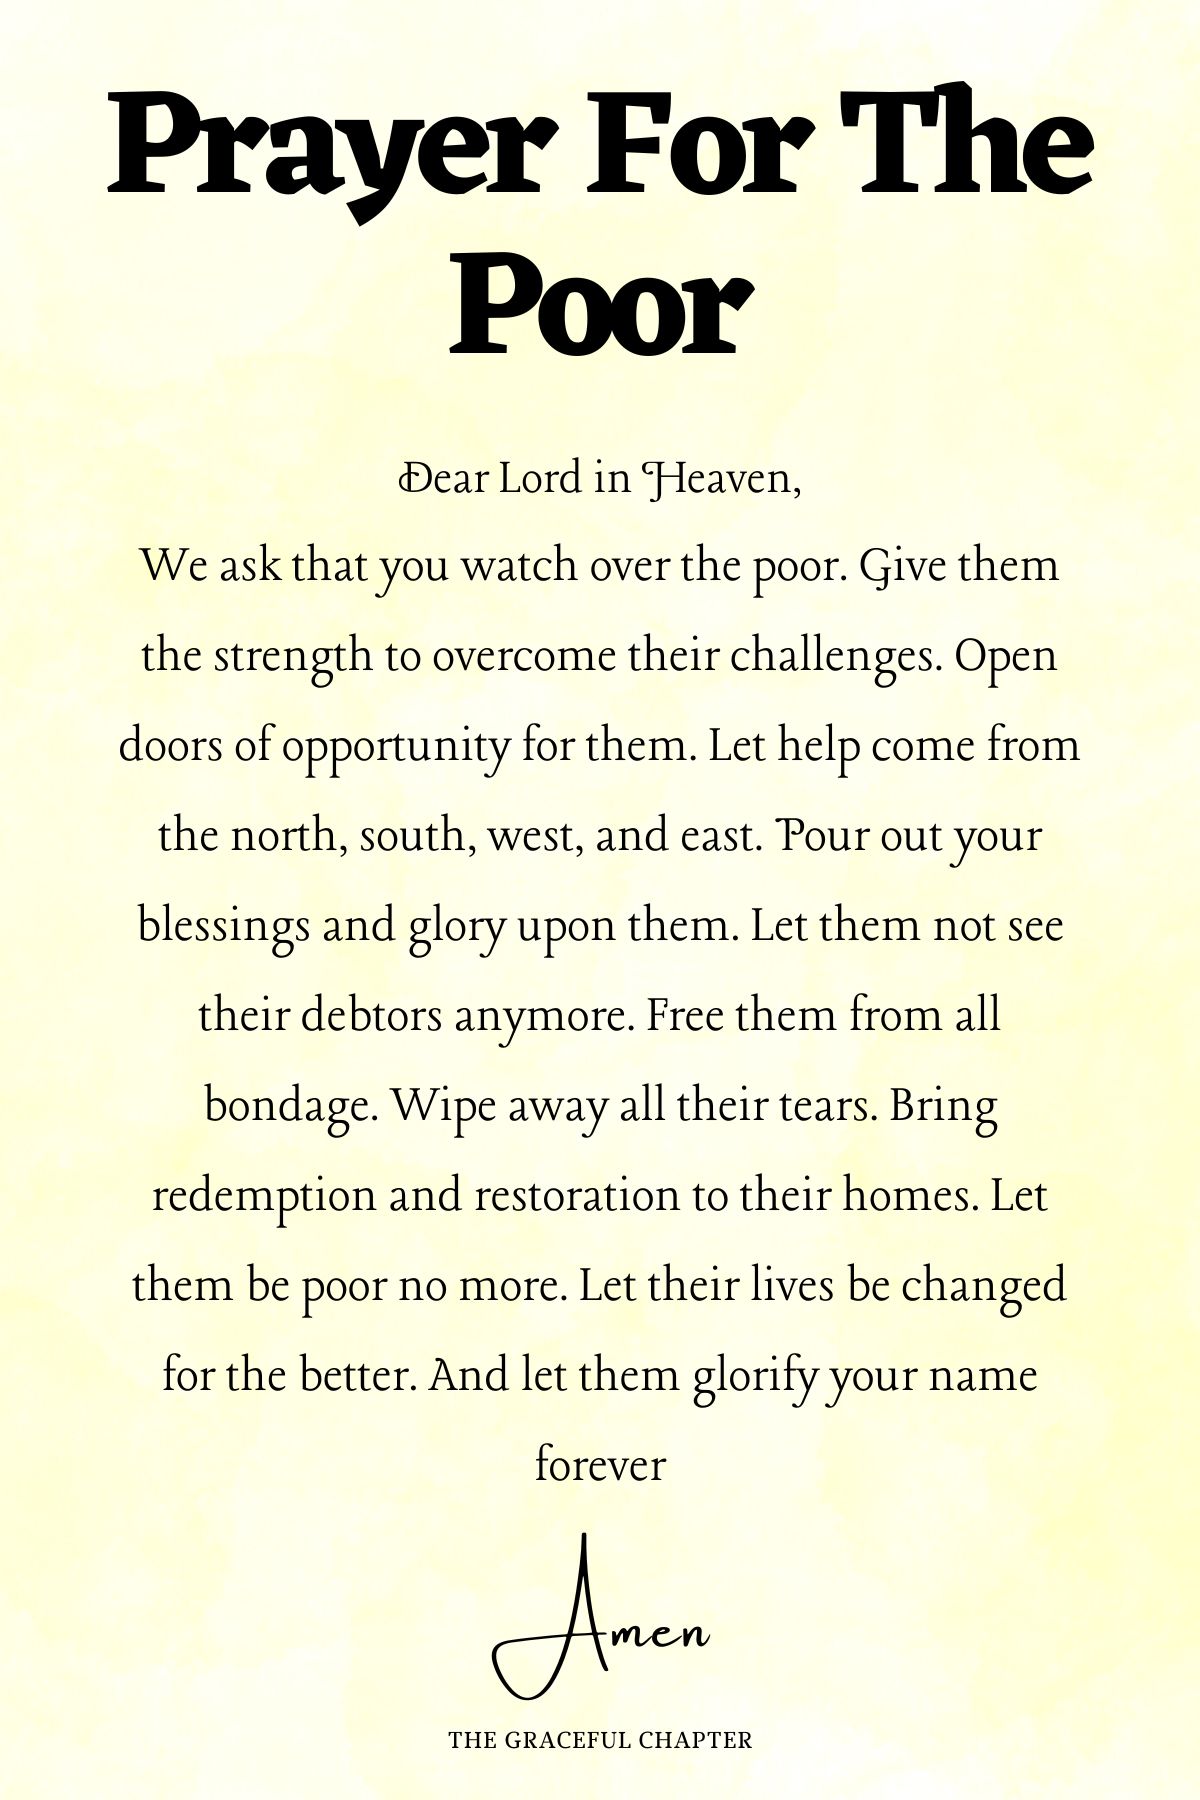 Prayer for the poor